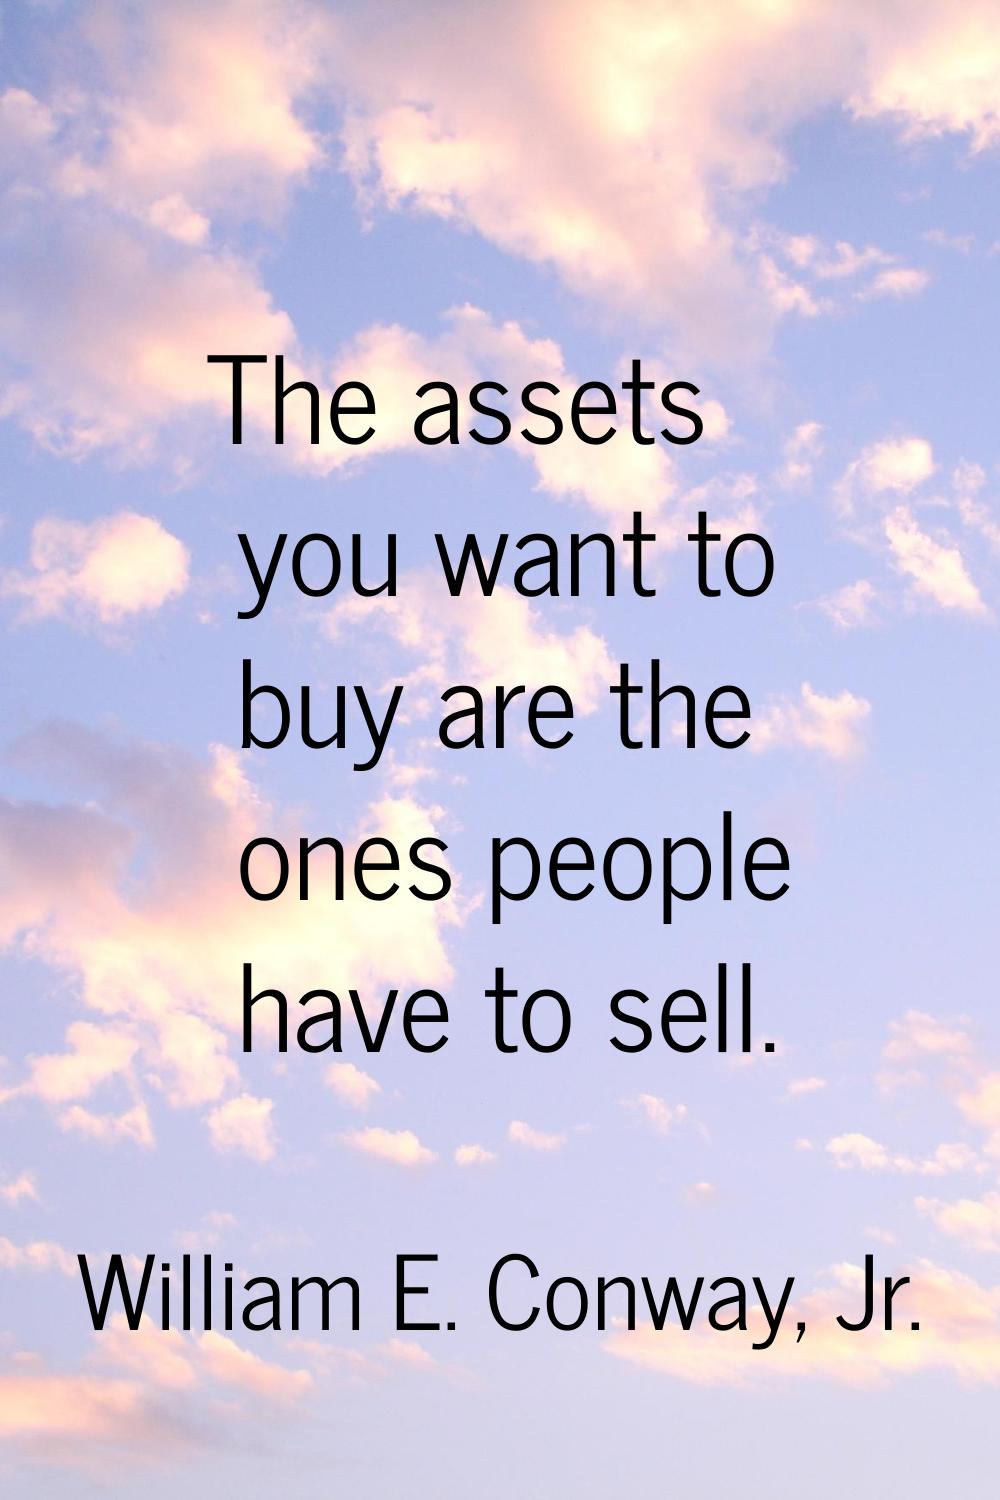 The assets you want to buy are the ones people have to sell.